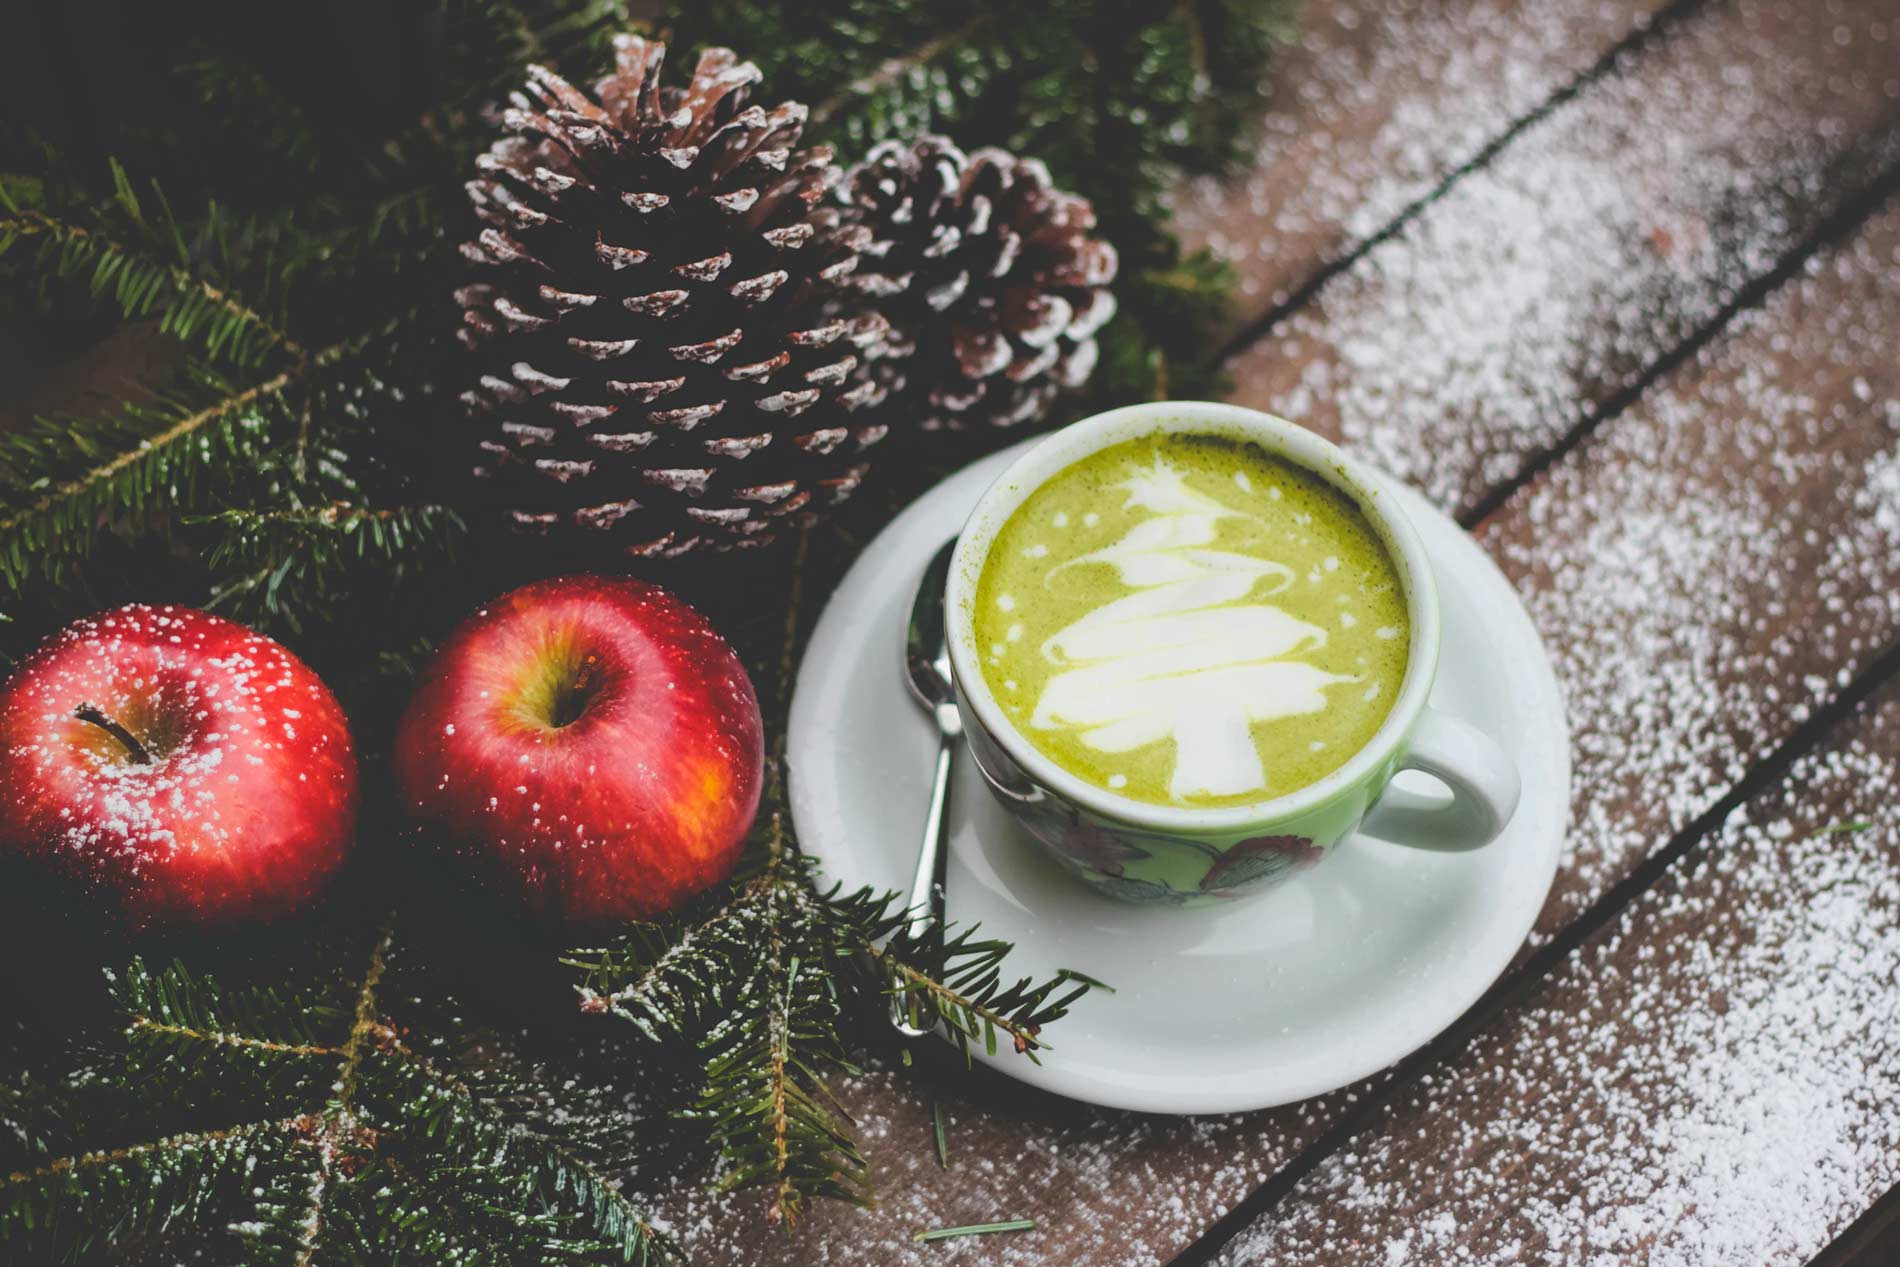 A Few Tips For a Healthy Holiday Season